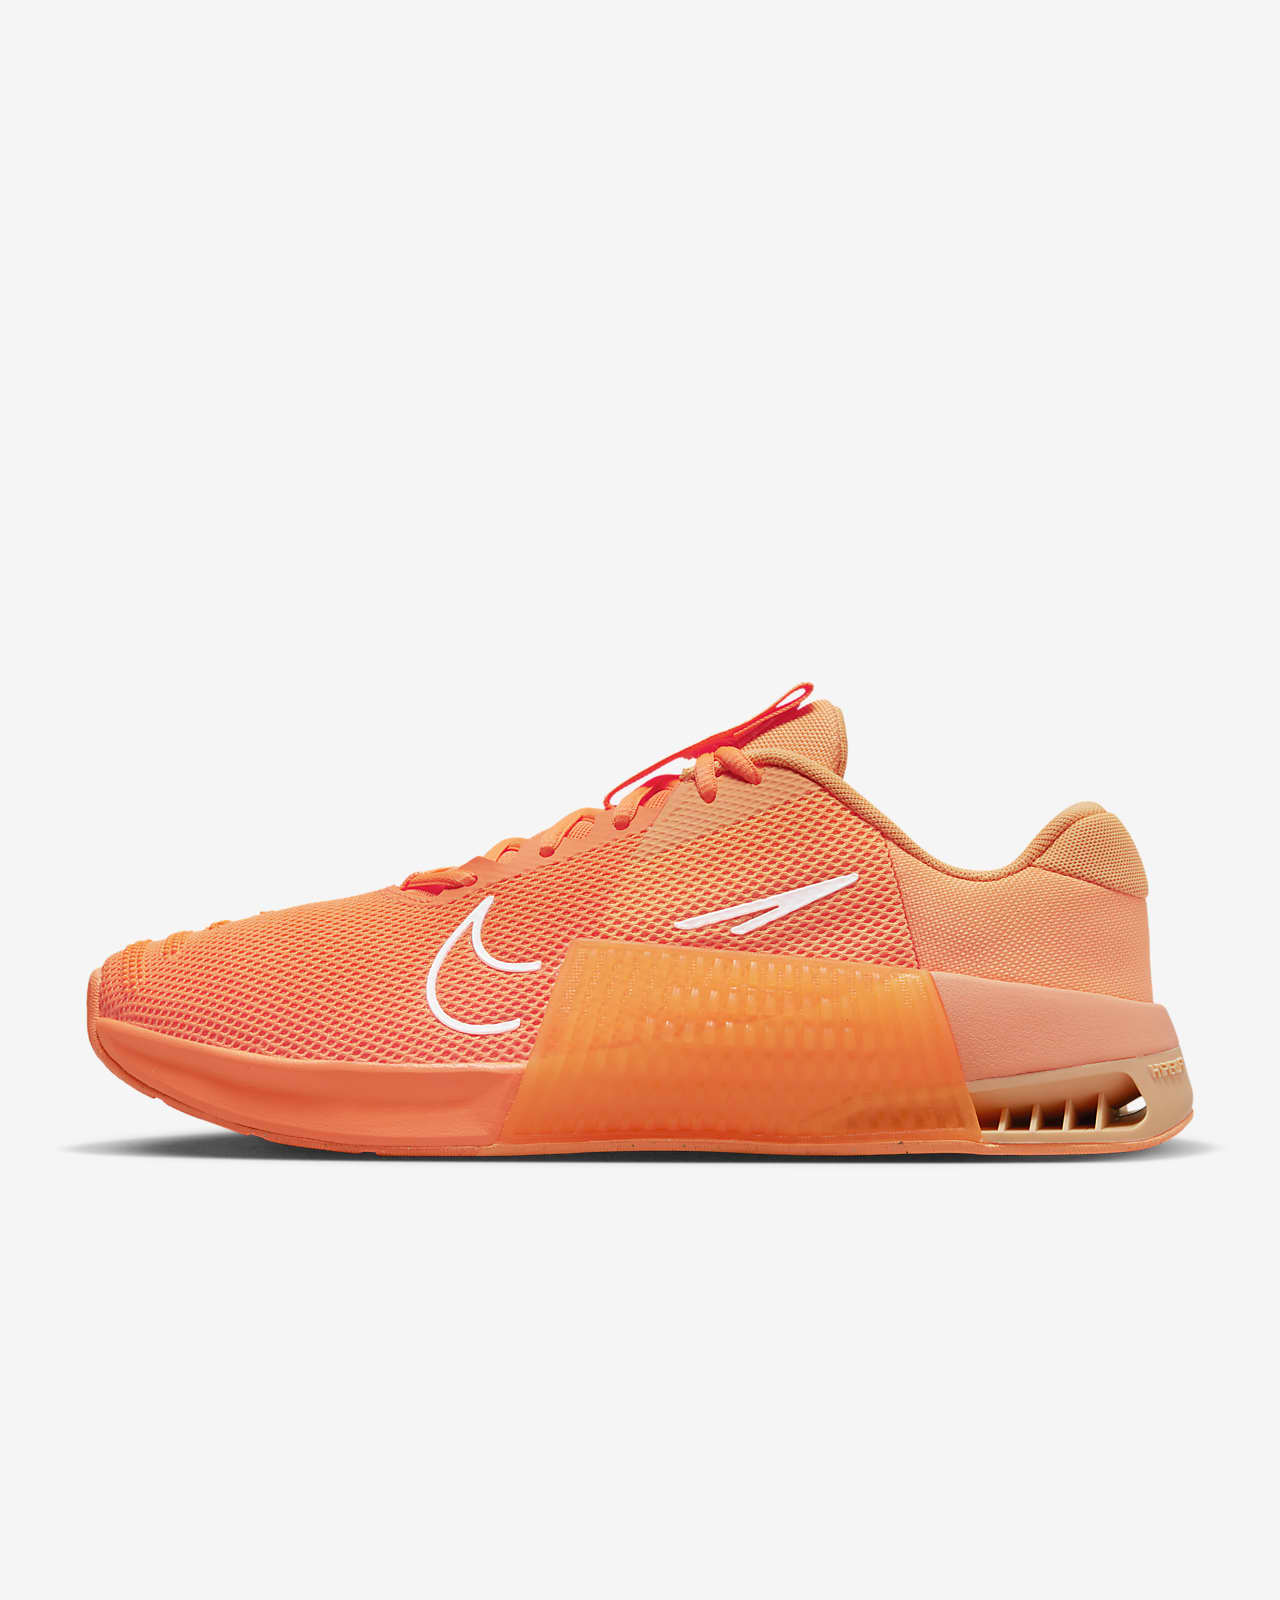 Cross Training Shoes Nike Metcon 9 Red